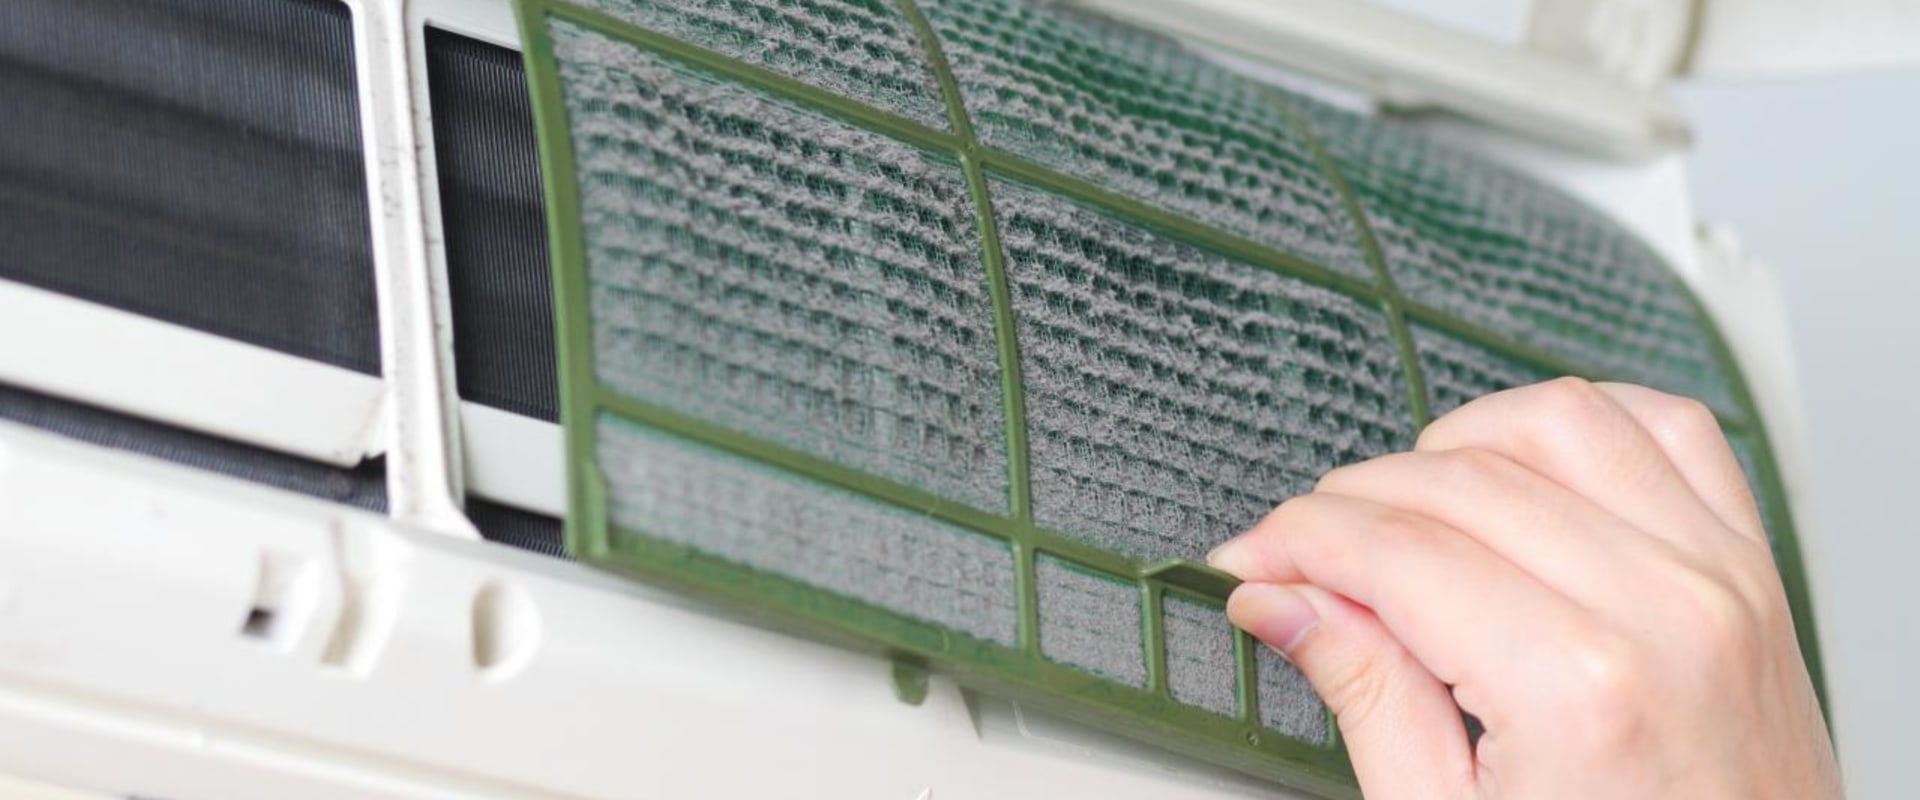 Can an AC Filter Be Washed? - A Comprehensive Guide